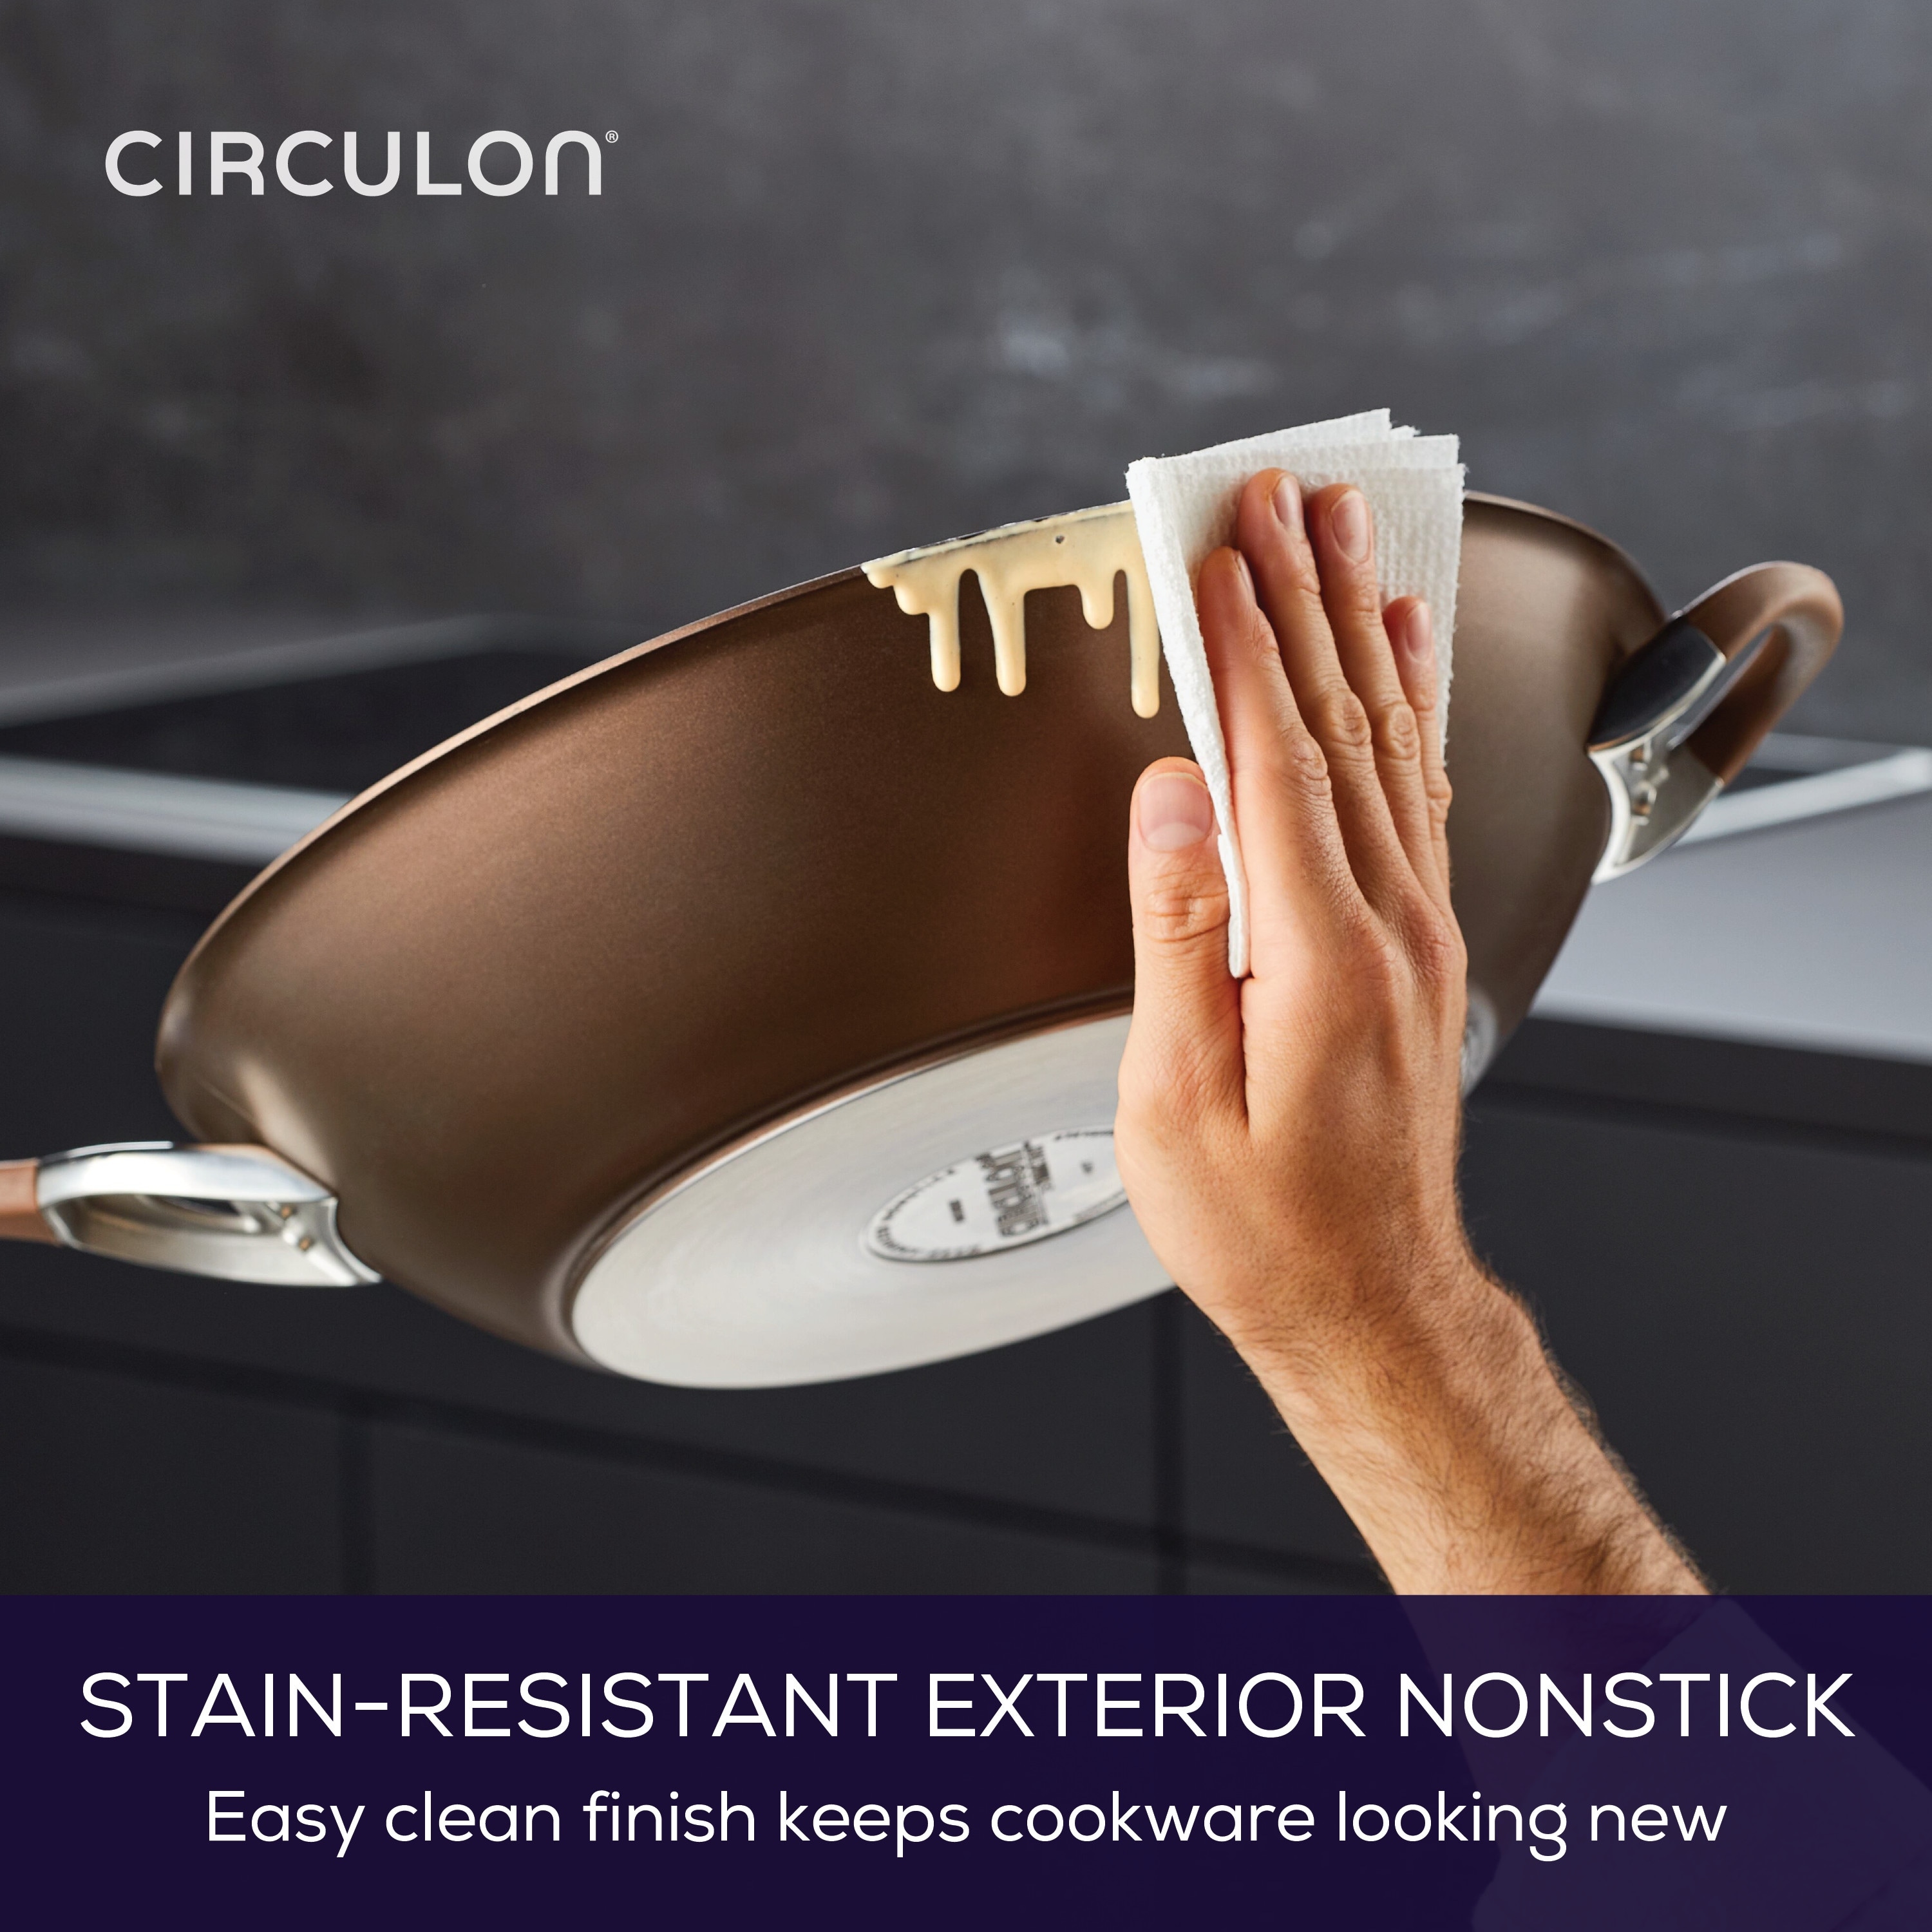 https://ak1.ostkcdn.com/images/products/is/images/direct/3d0722d3aca5b4cc90cb3d5bed8b4e0f074941da/Circulon-Symmetry-Hard-Anodized-Nonstick-Induction-Stir-Fry-Pan-with-Helper-Handle%2C-14-Inch%2C-Chocolate.jpg